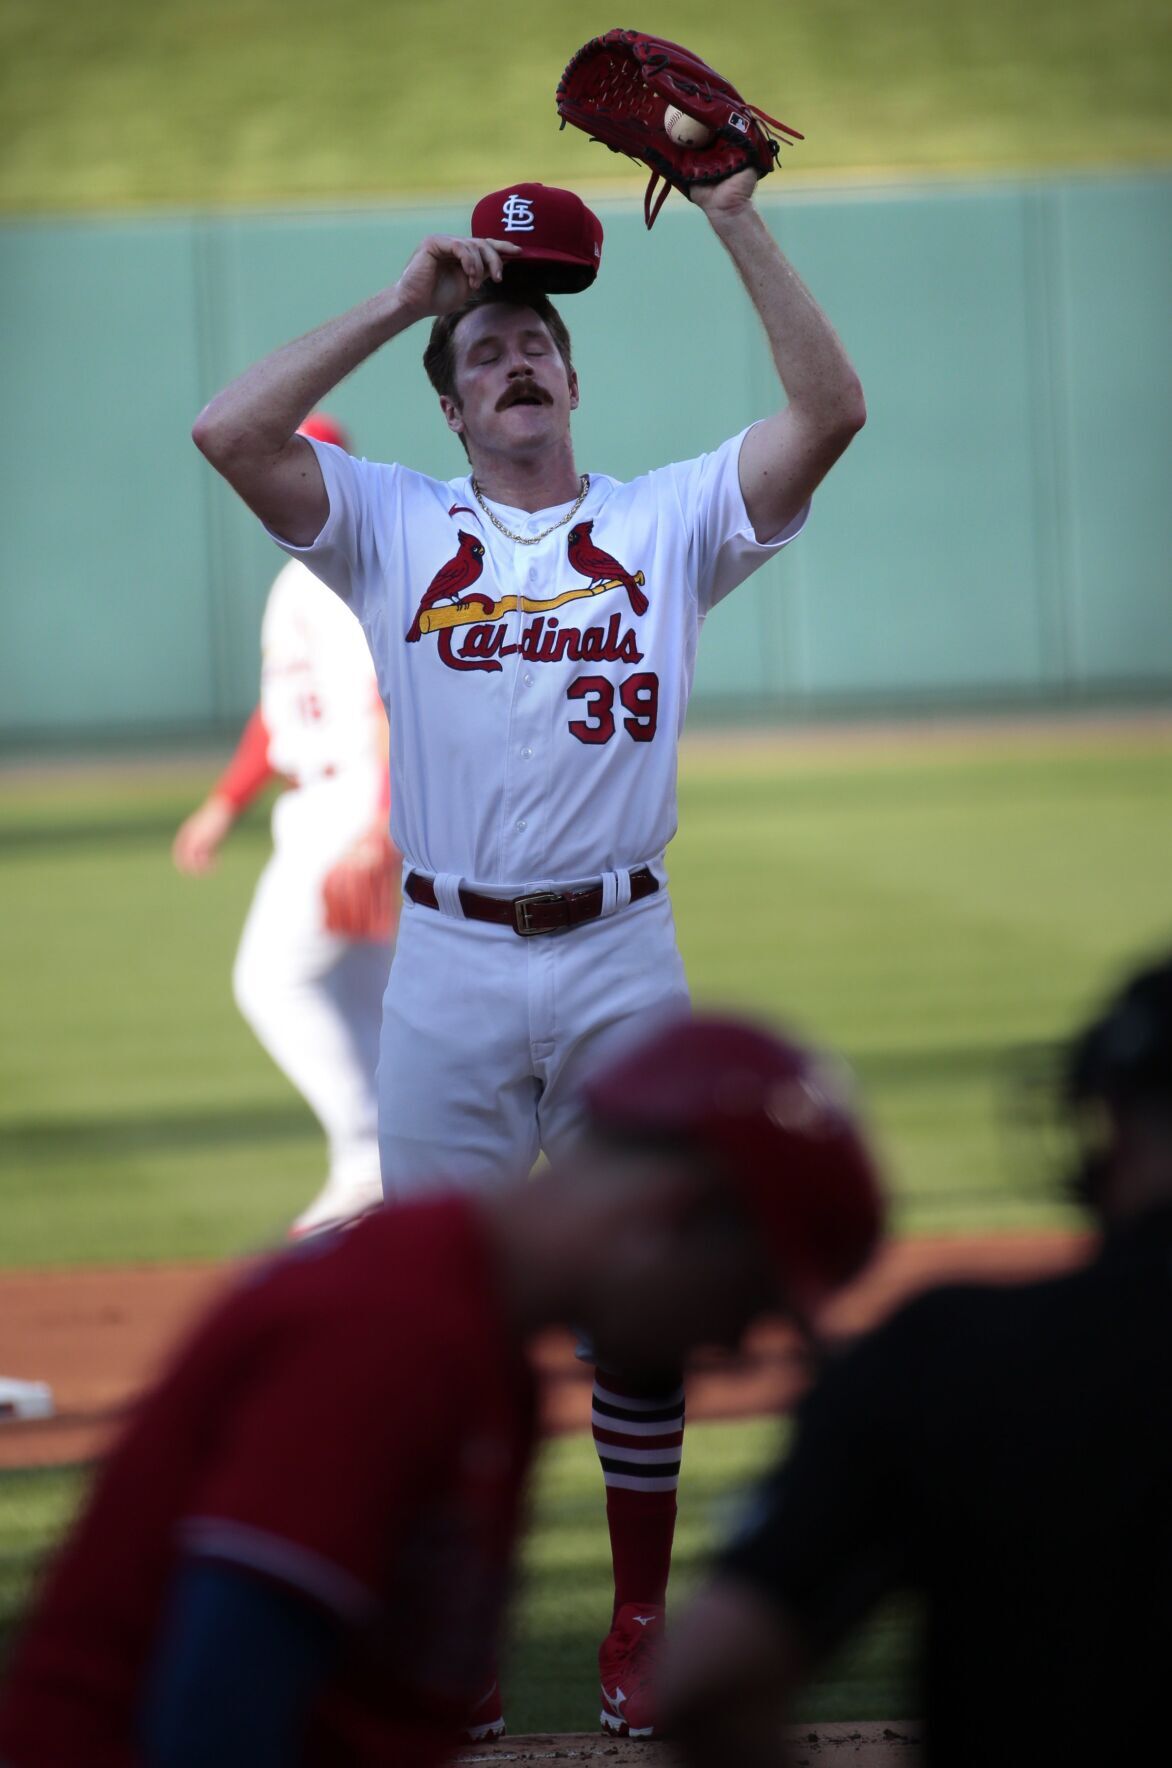 After loss, Cardinals manager questions O'Neill's base running effort in  key play